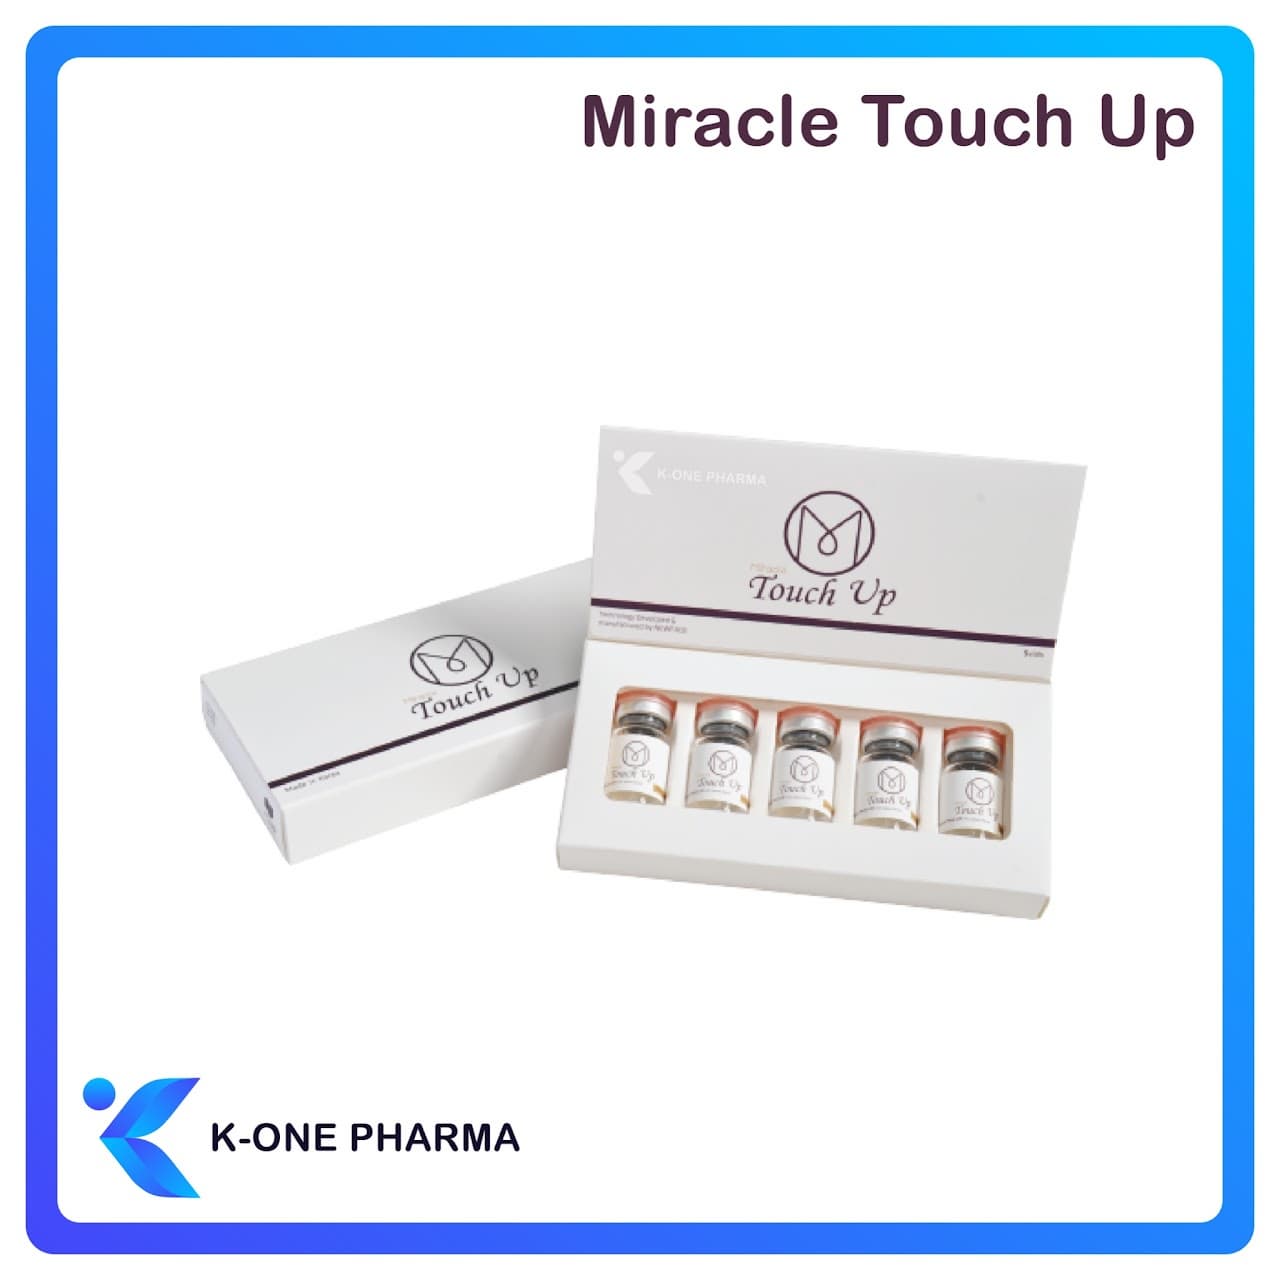 MIRACLE TOUCH UP Skin Booster Hydrating Glow Serum Etrebelle Moisture Skin Revolax Smoothing